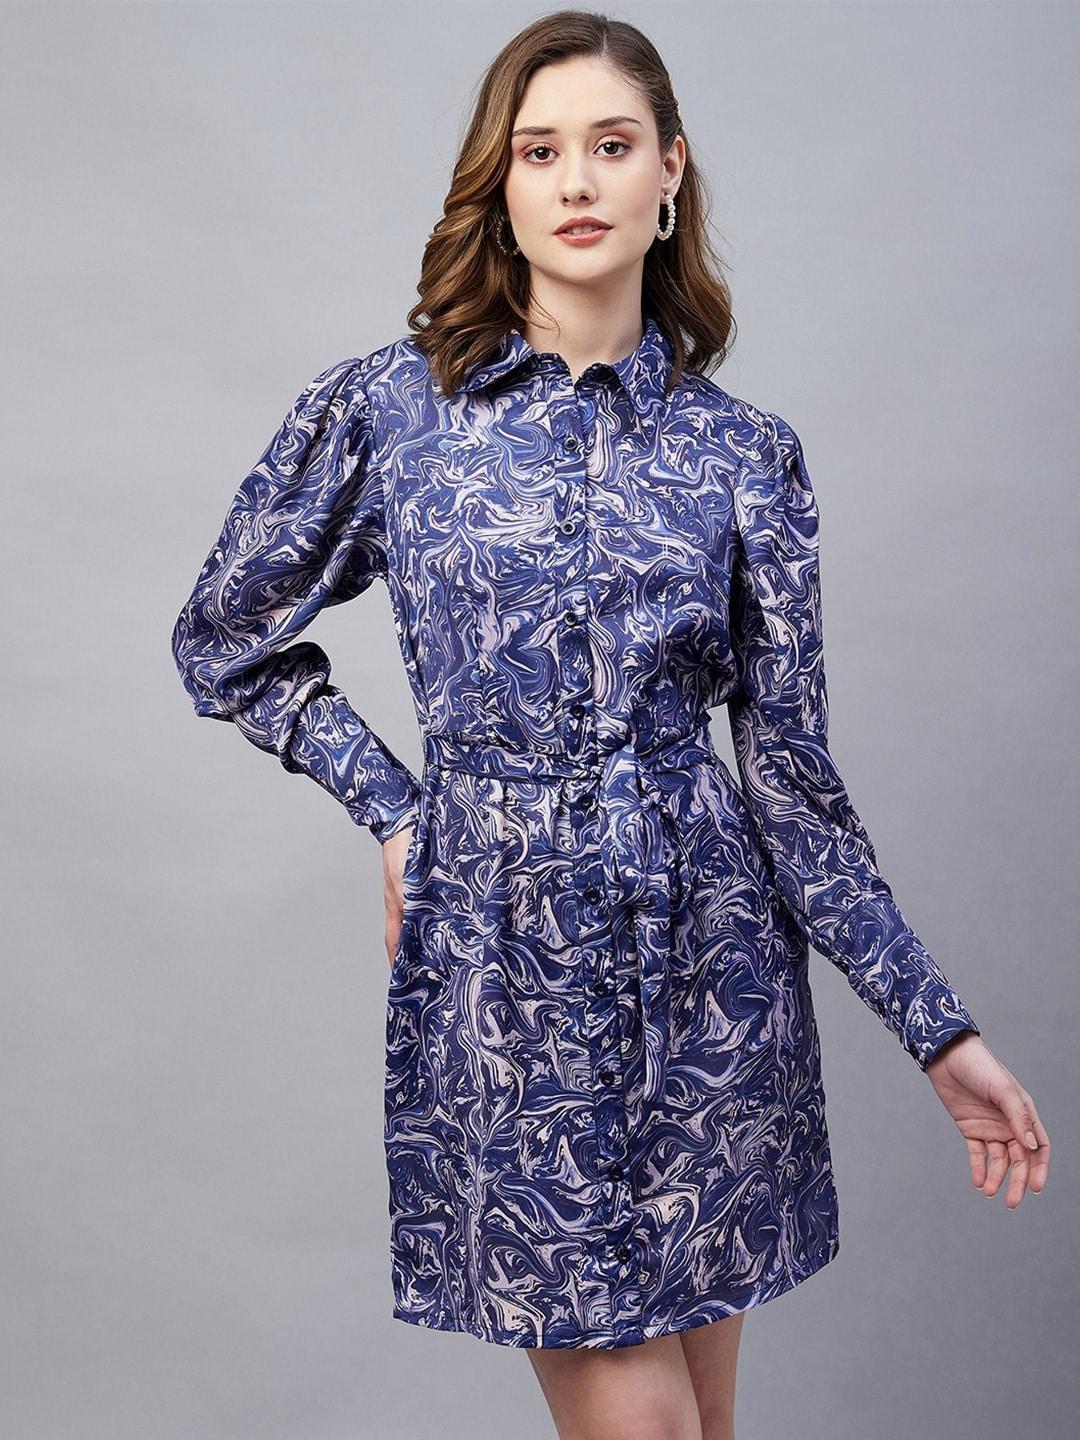 marie-claire-abstract-printed-satin-shirt-dress